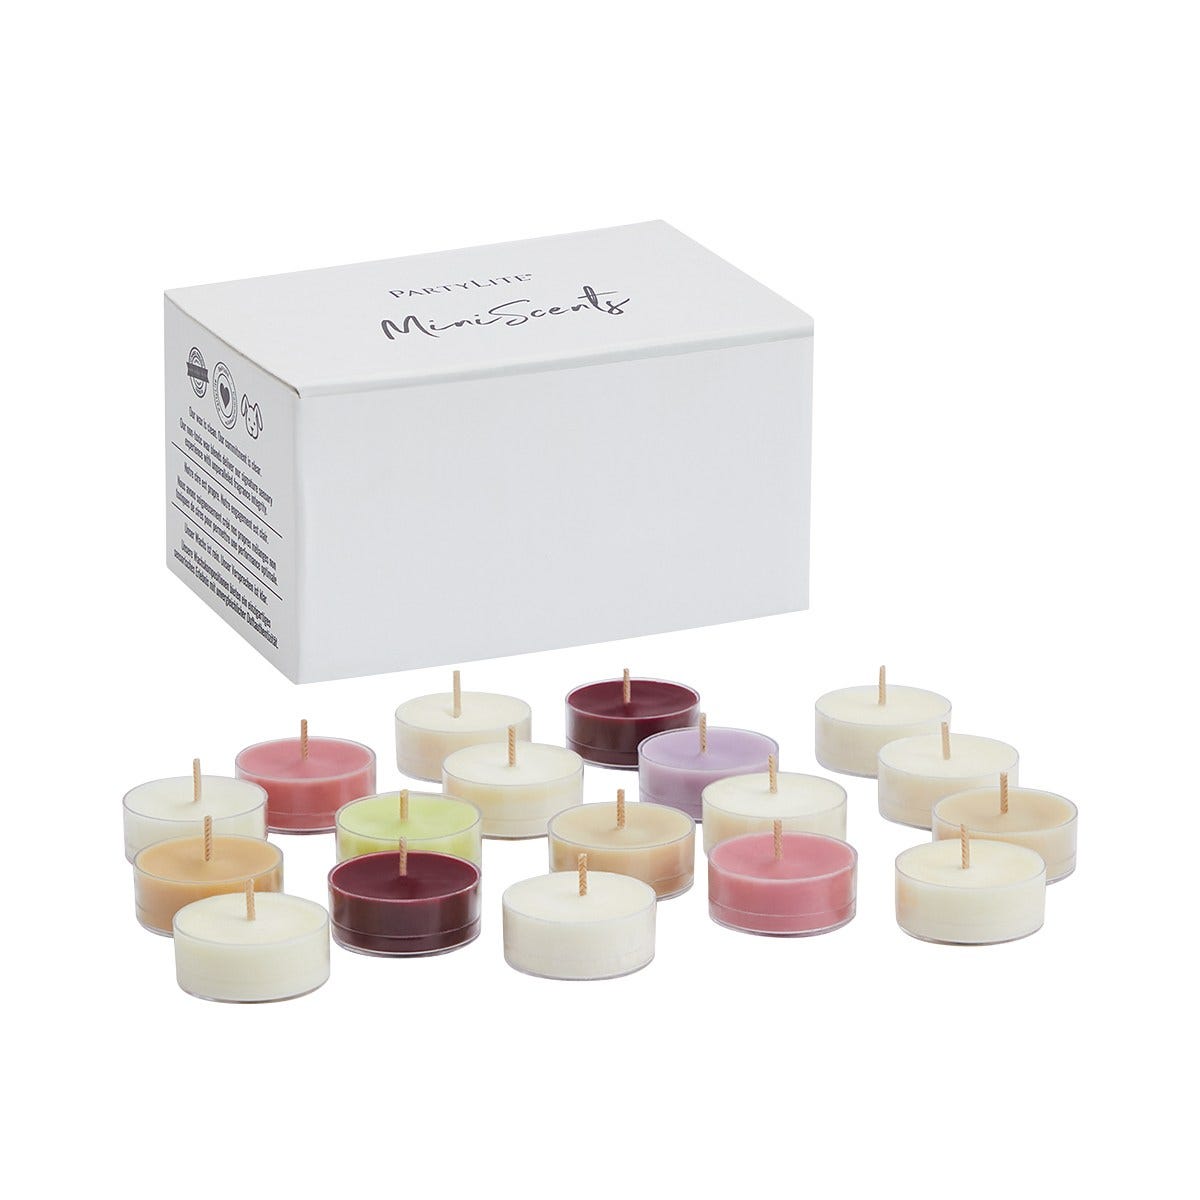 Specialty '24 MiniScents 18-Piece Tealight Sampler - PartyLite US